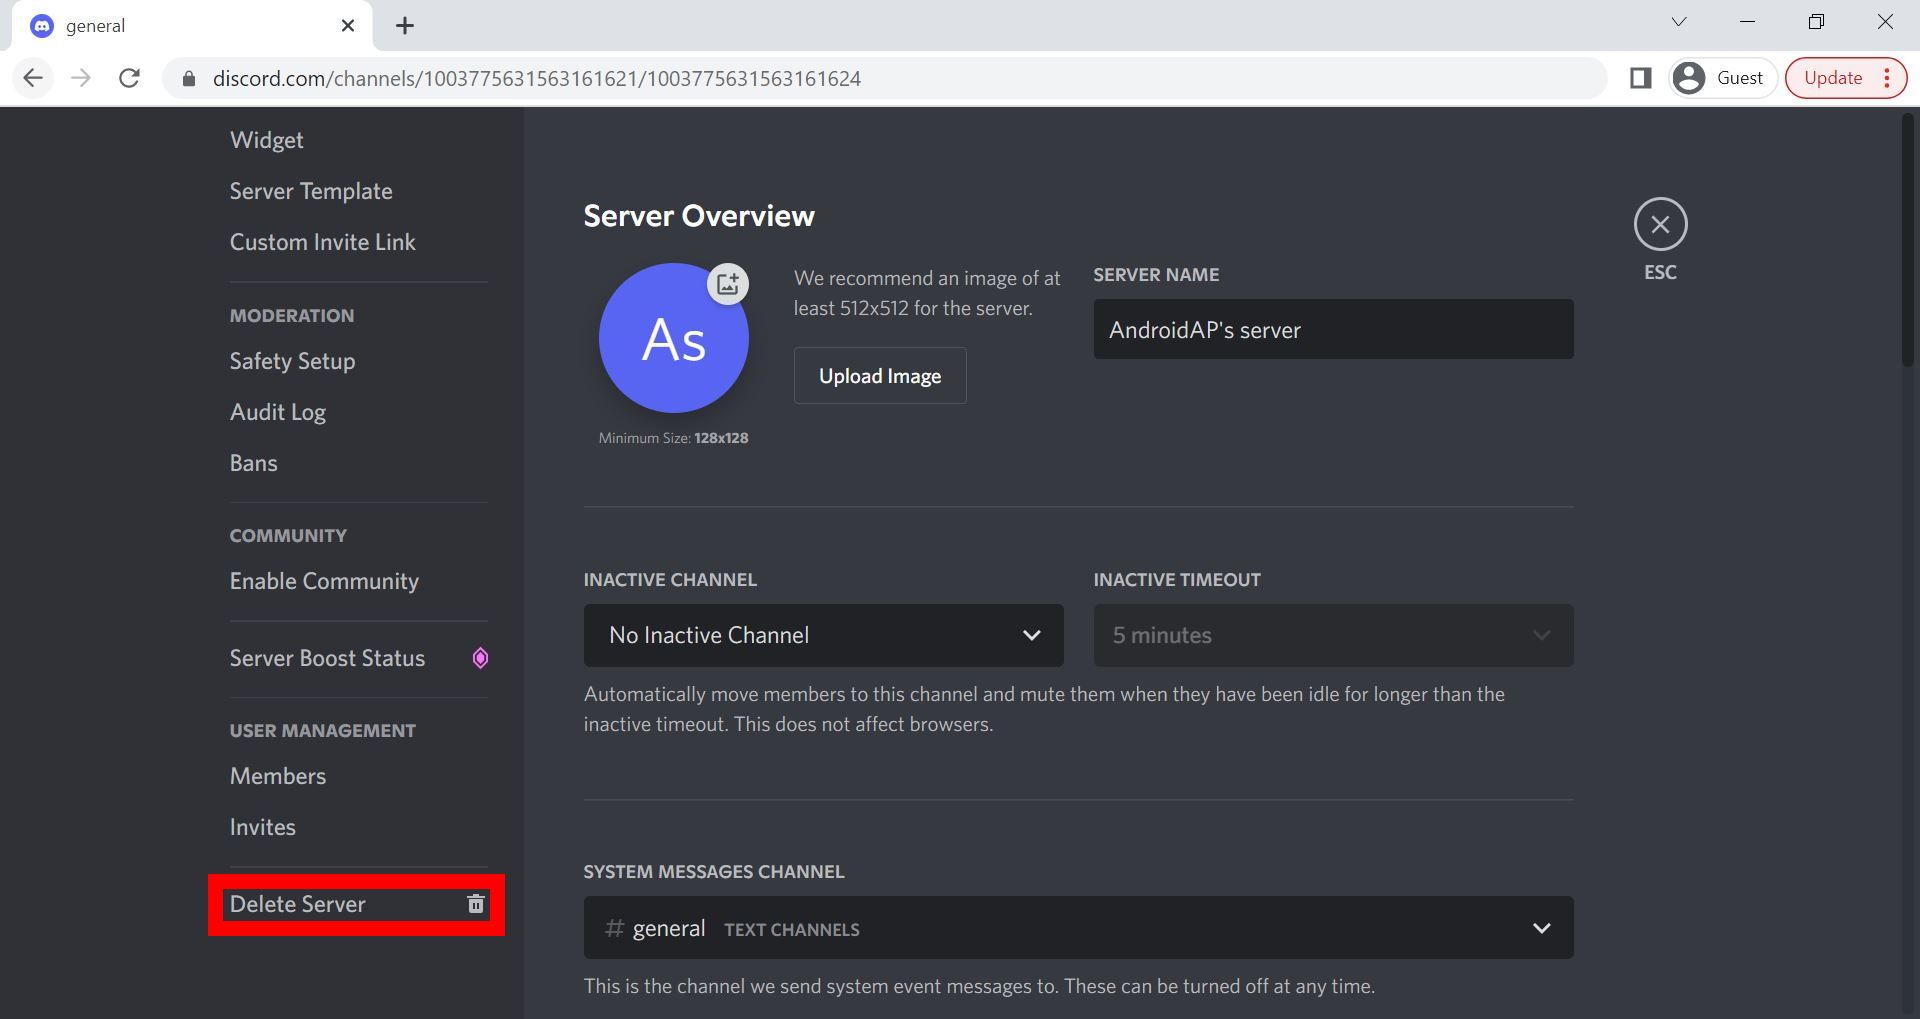 Screenshot of the Delete Server option on the Discord web page